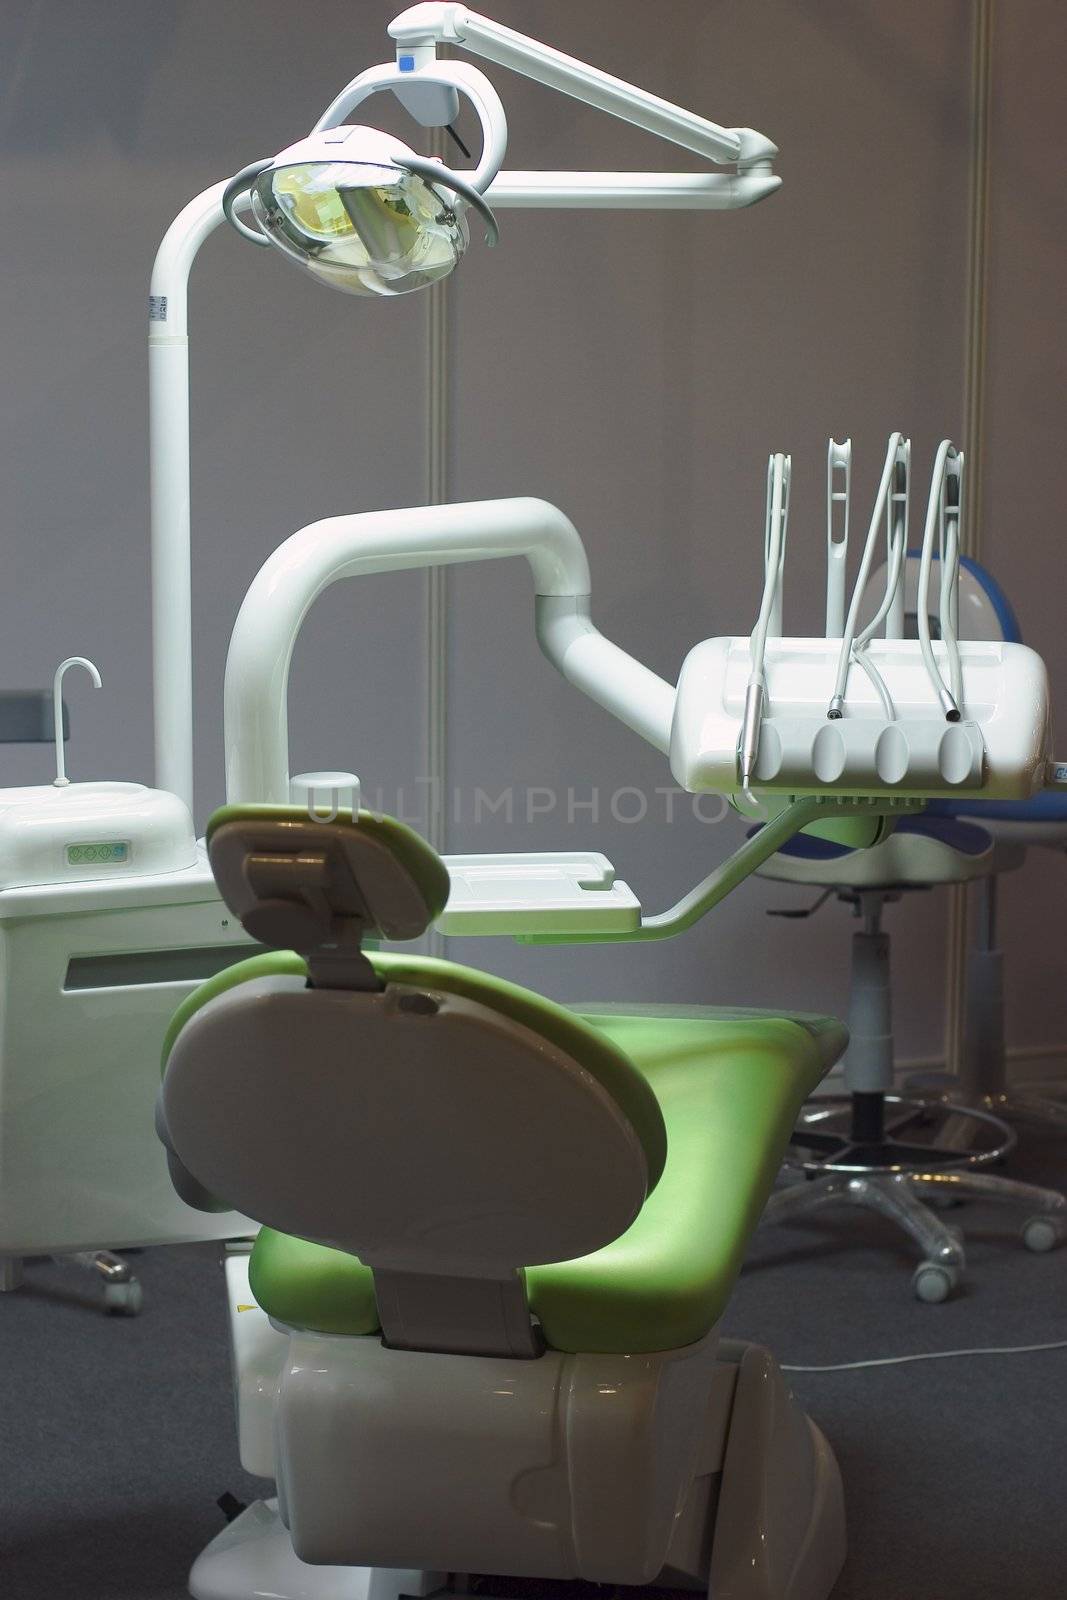 Equipment work place of dentist